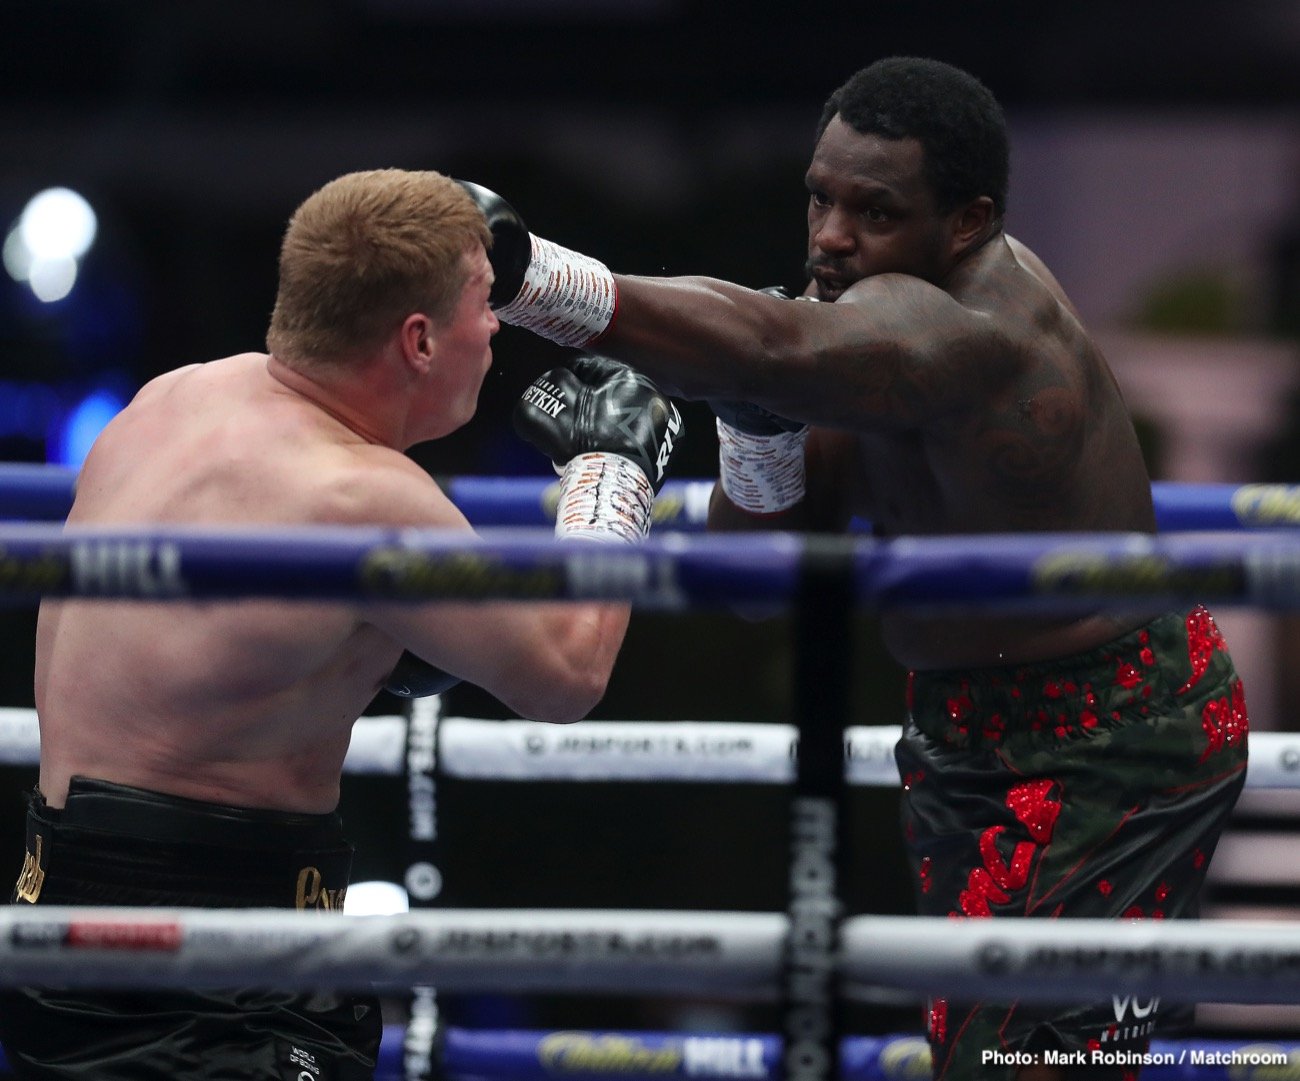 Image: LIVE RESULTS: Povetkin KOs Whyte, Taylor outpoints Persoon!